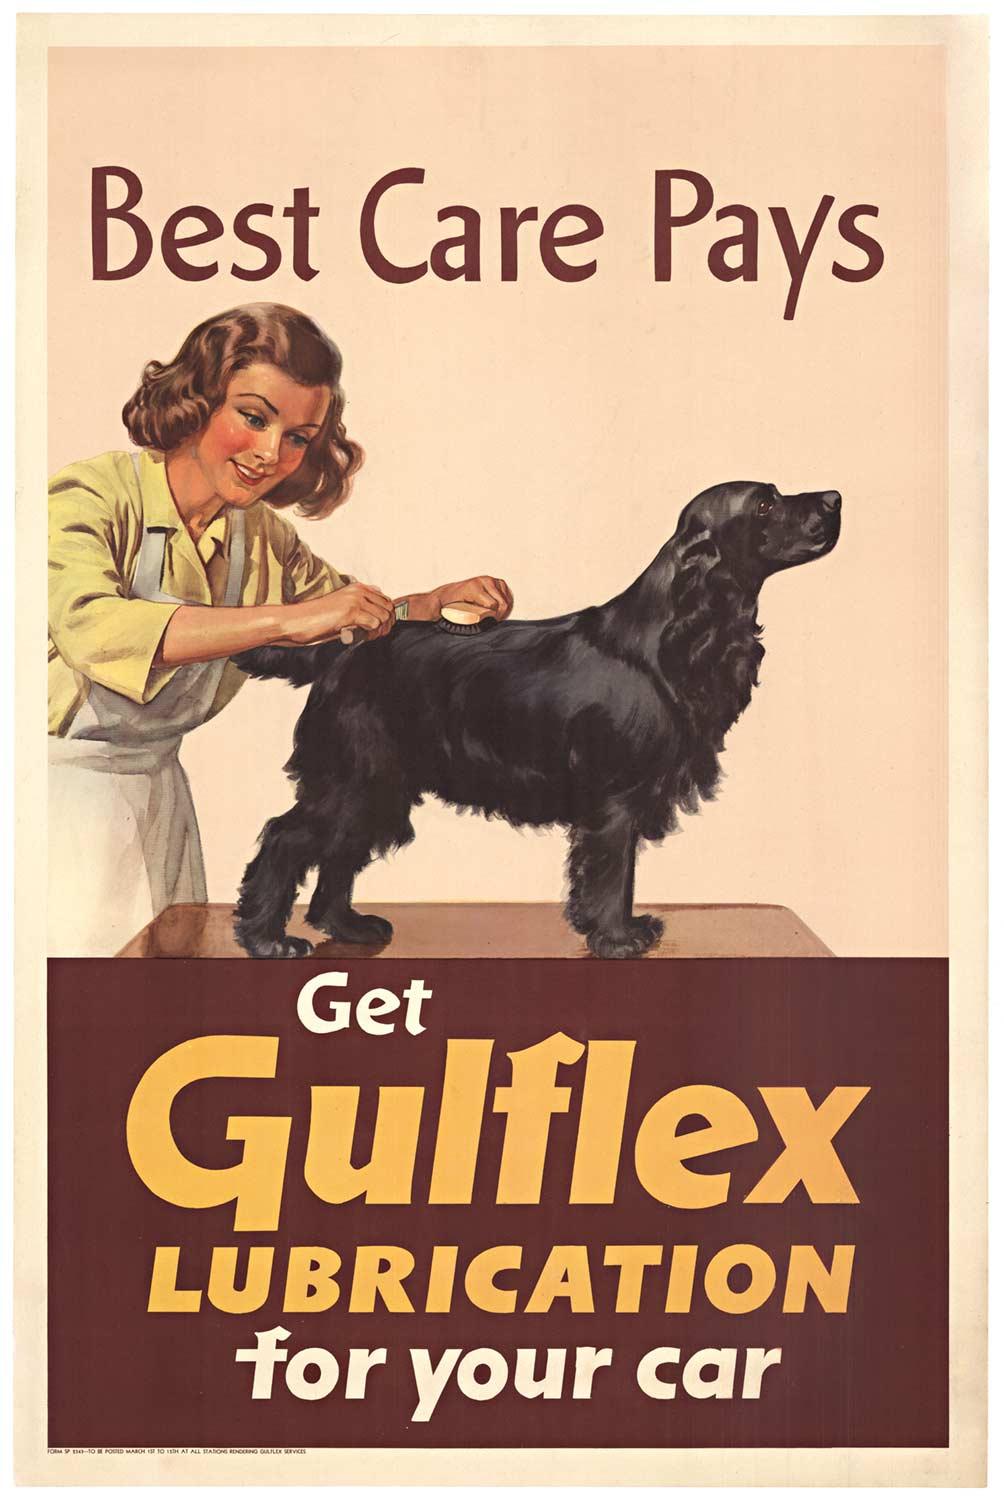 Unknown Animal Print - Original "Gulflex Lubrication for your car" Best Care Pays vintage poster